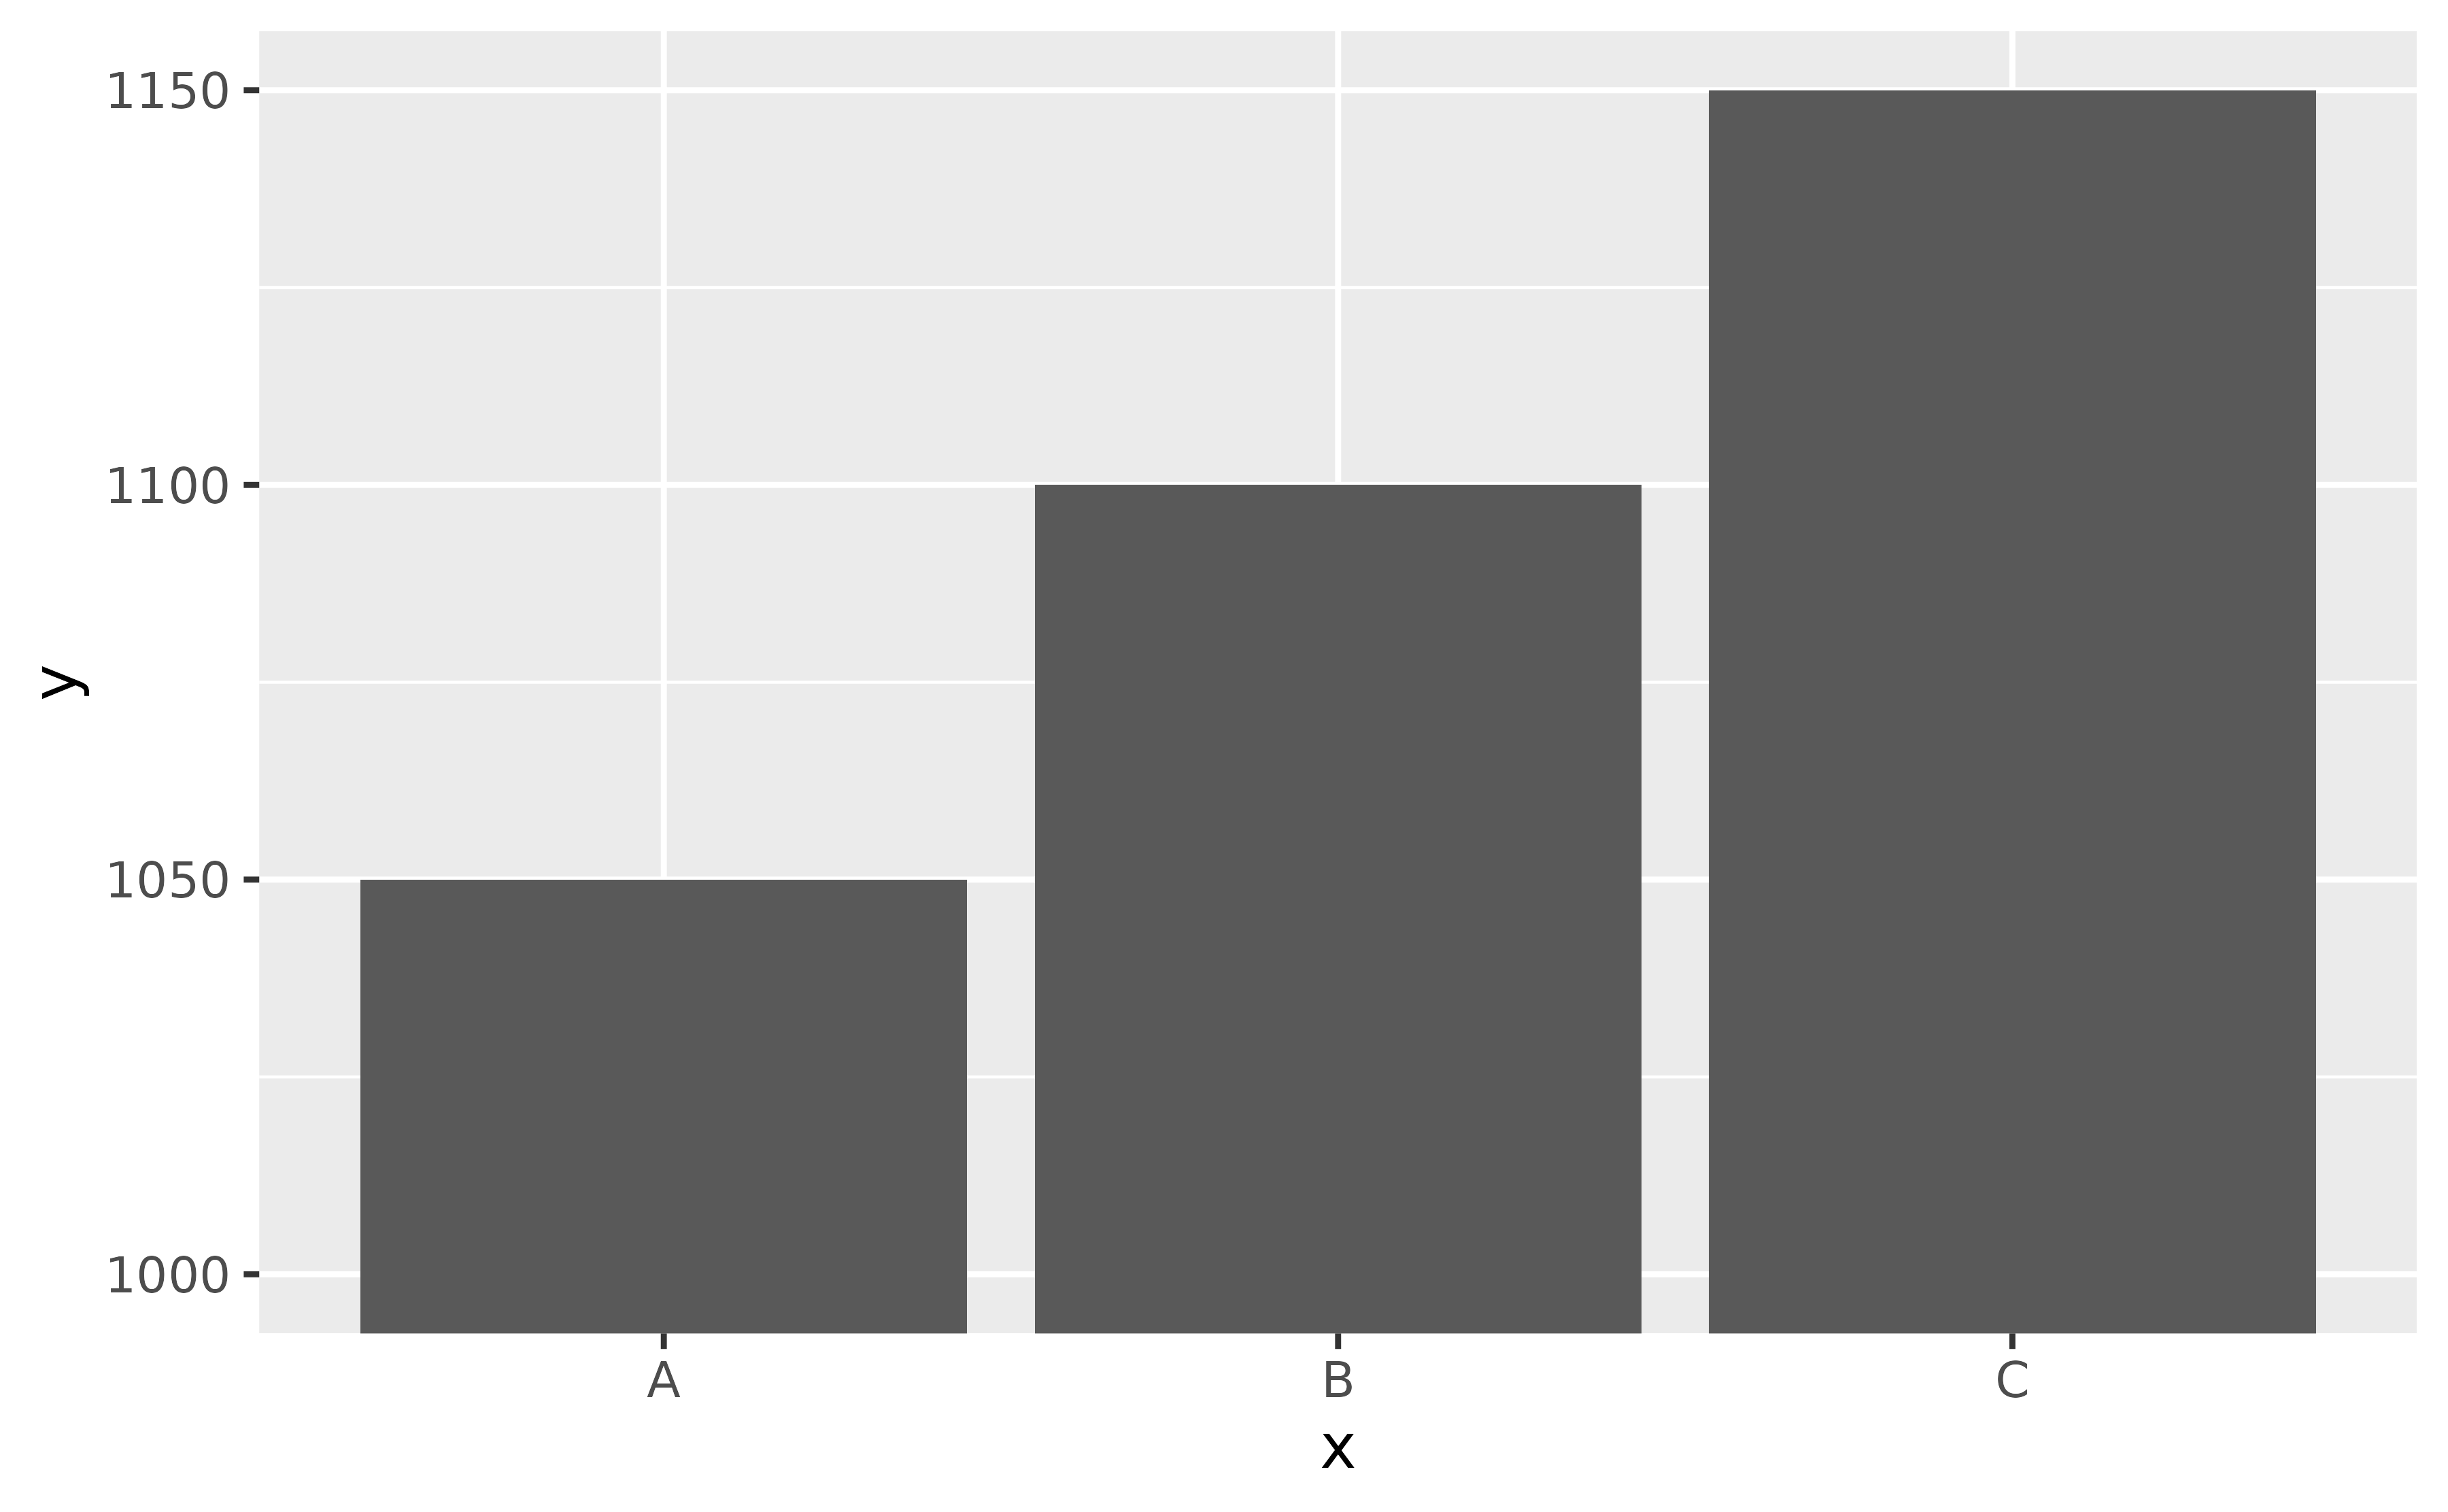 A bar chart showing numbers for 3 arbitrary categories. The y-axis starts at 1000 and the bars all look different in height. This is not a recommended way of plotting this data.